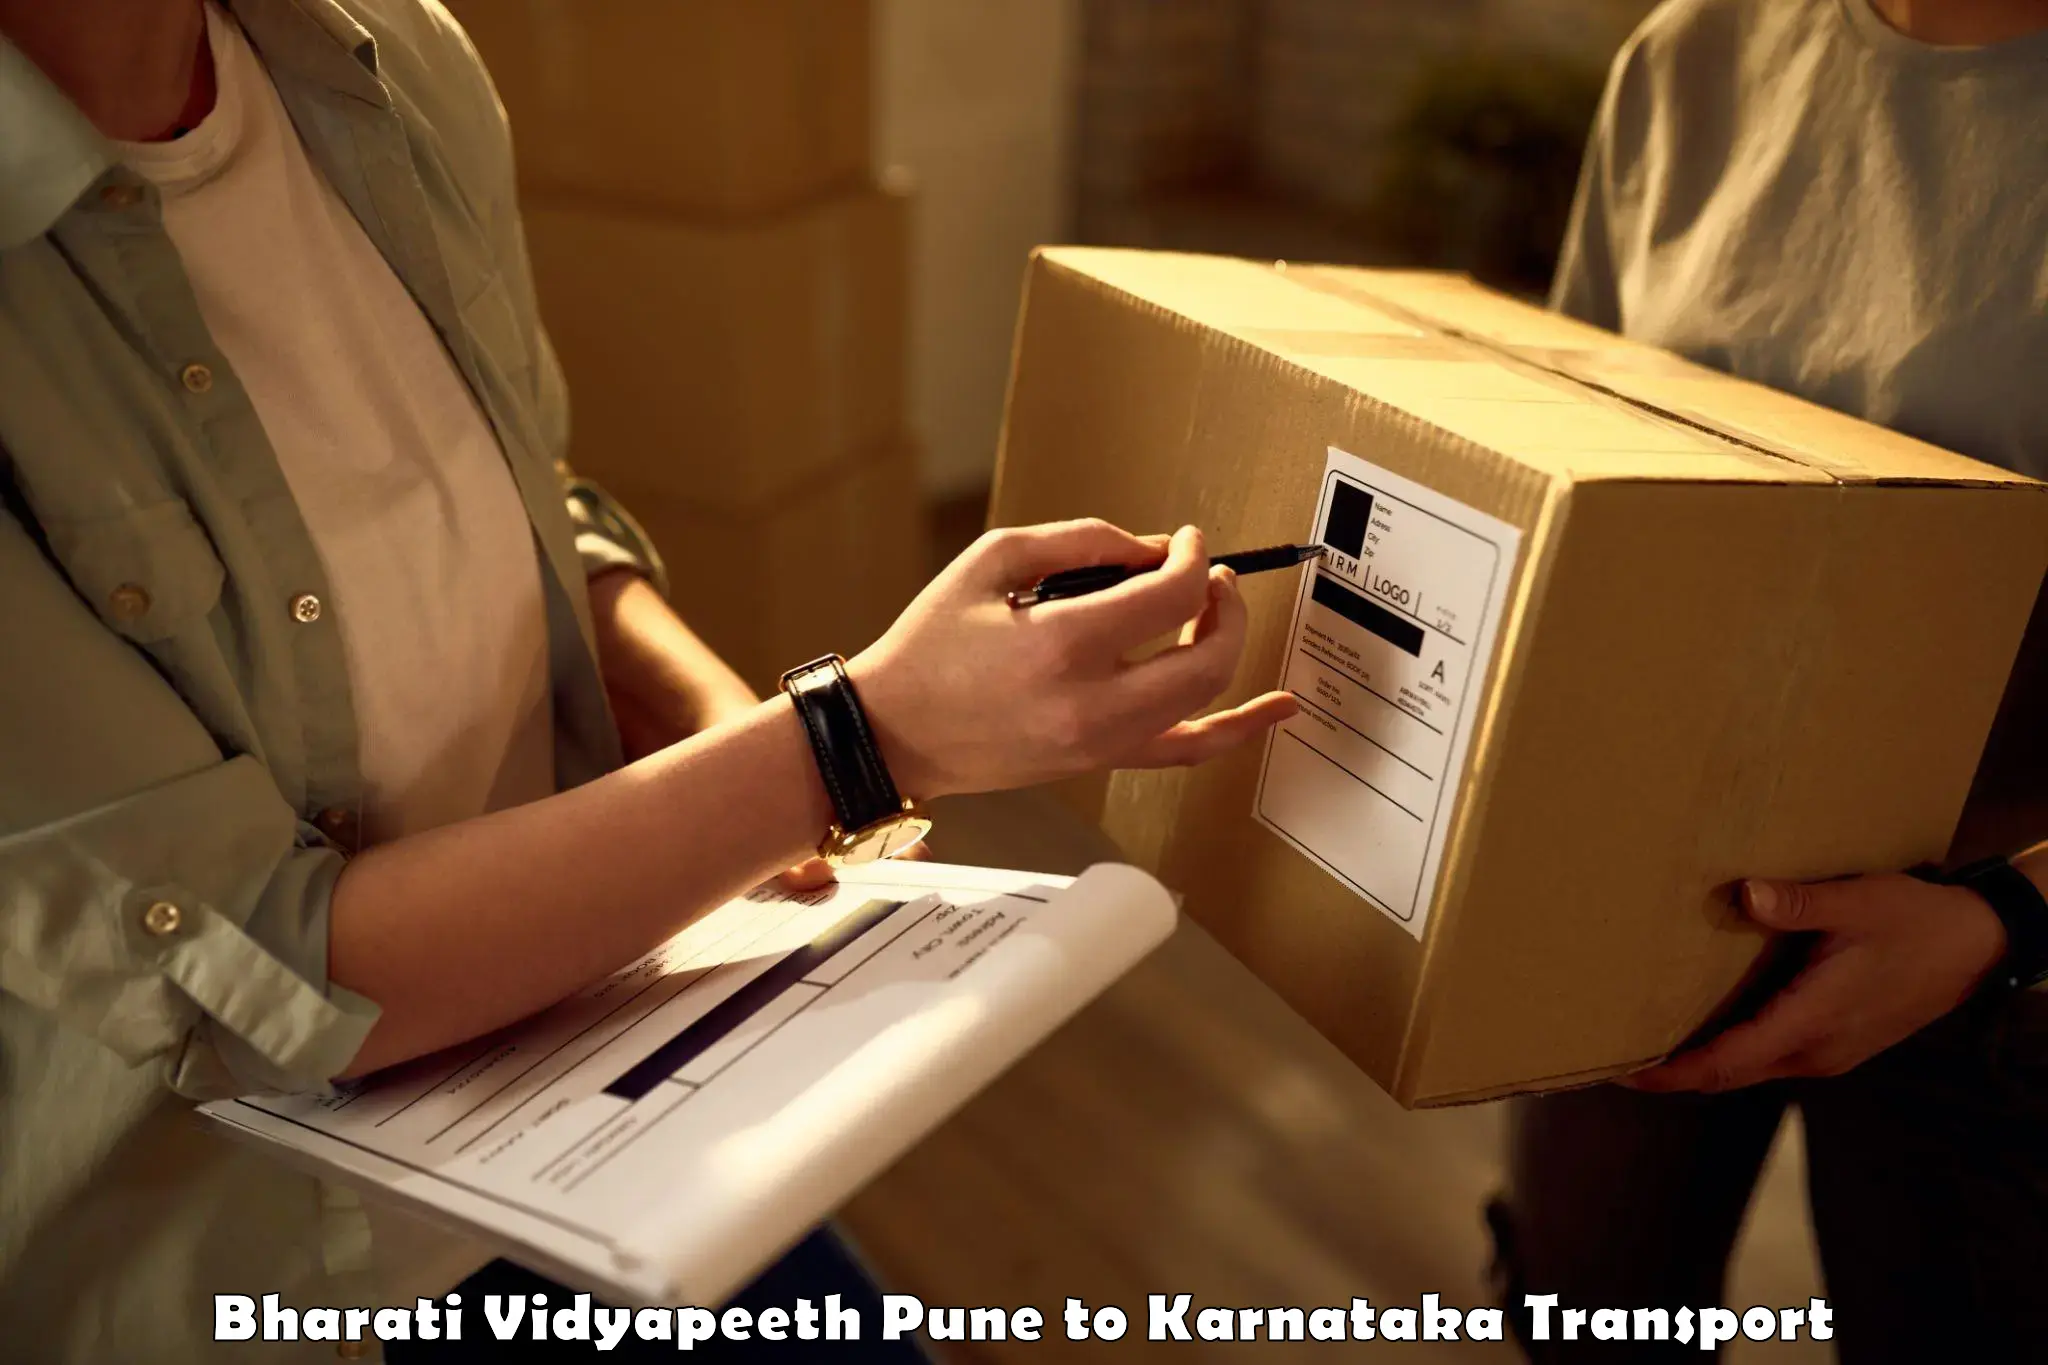 Package delivery services Bharati Vidyapeeth Pune to Ramanathapura